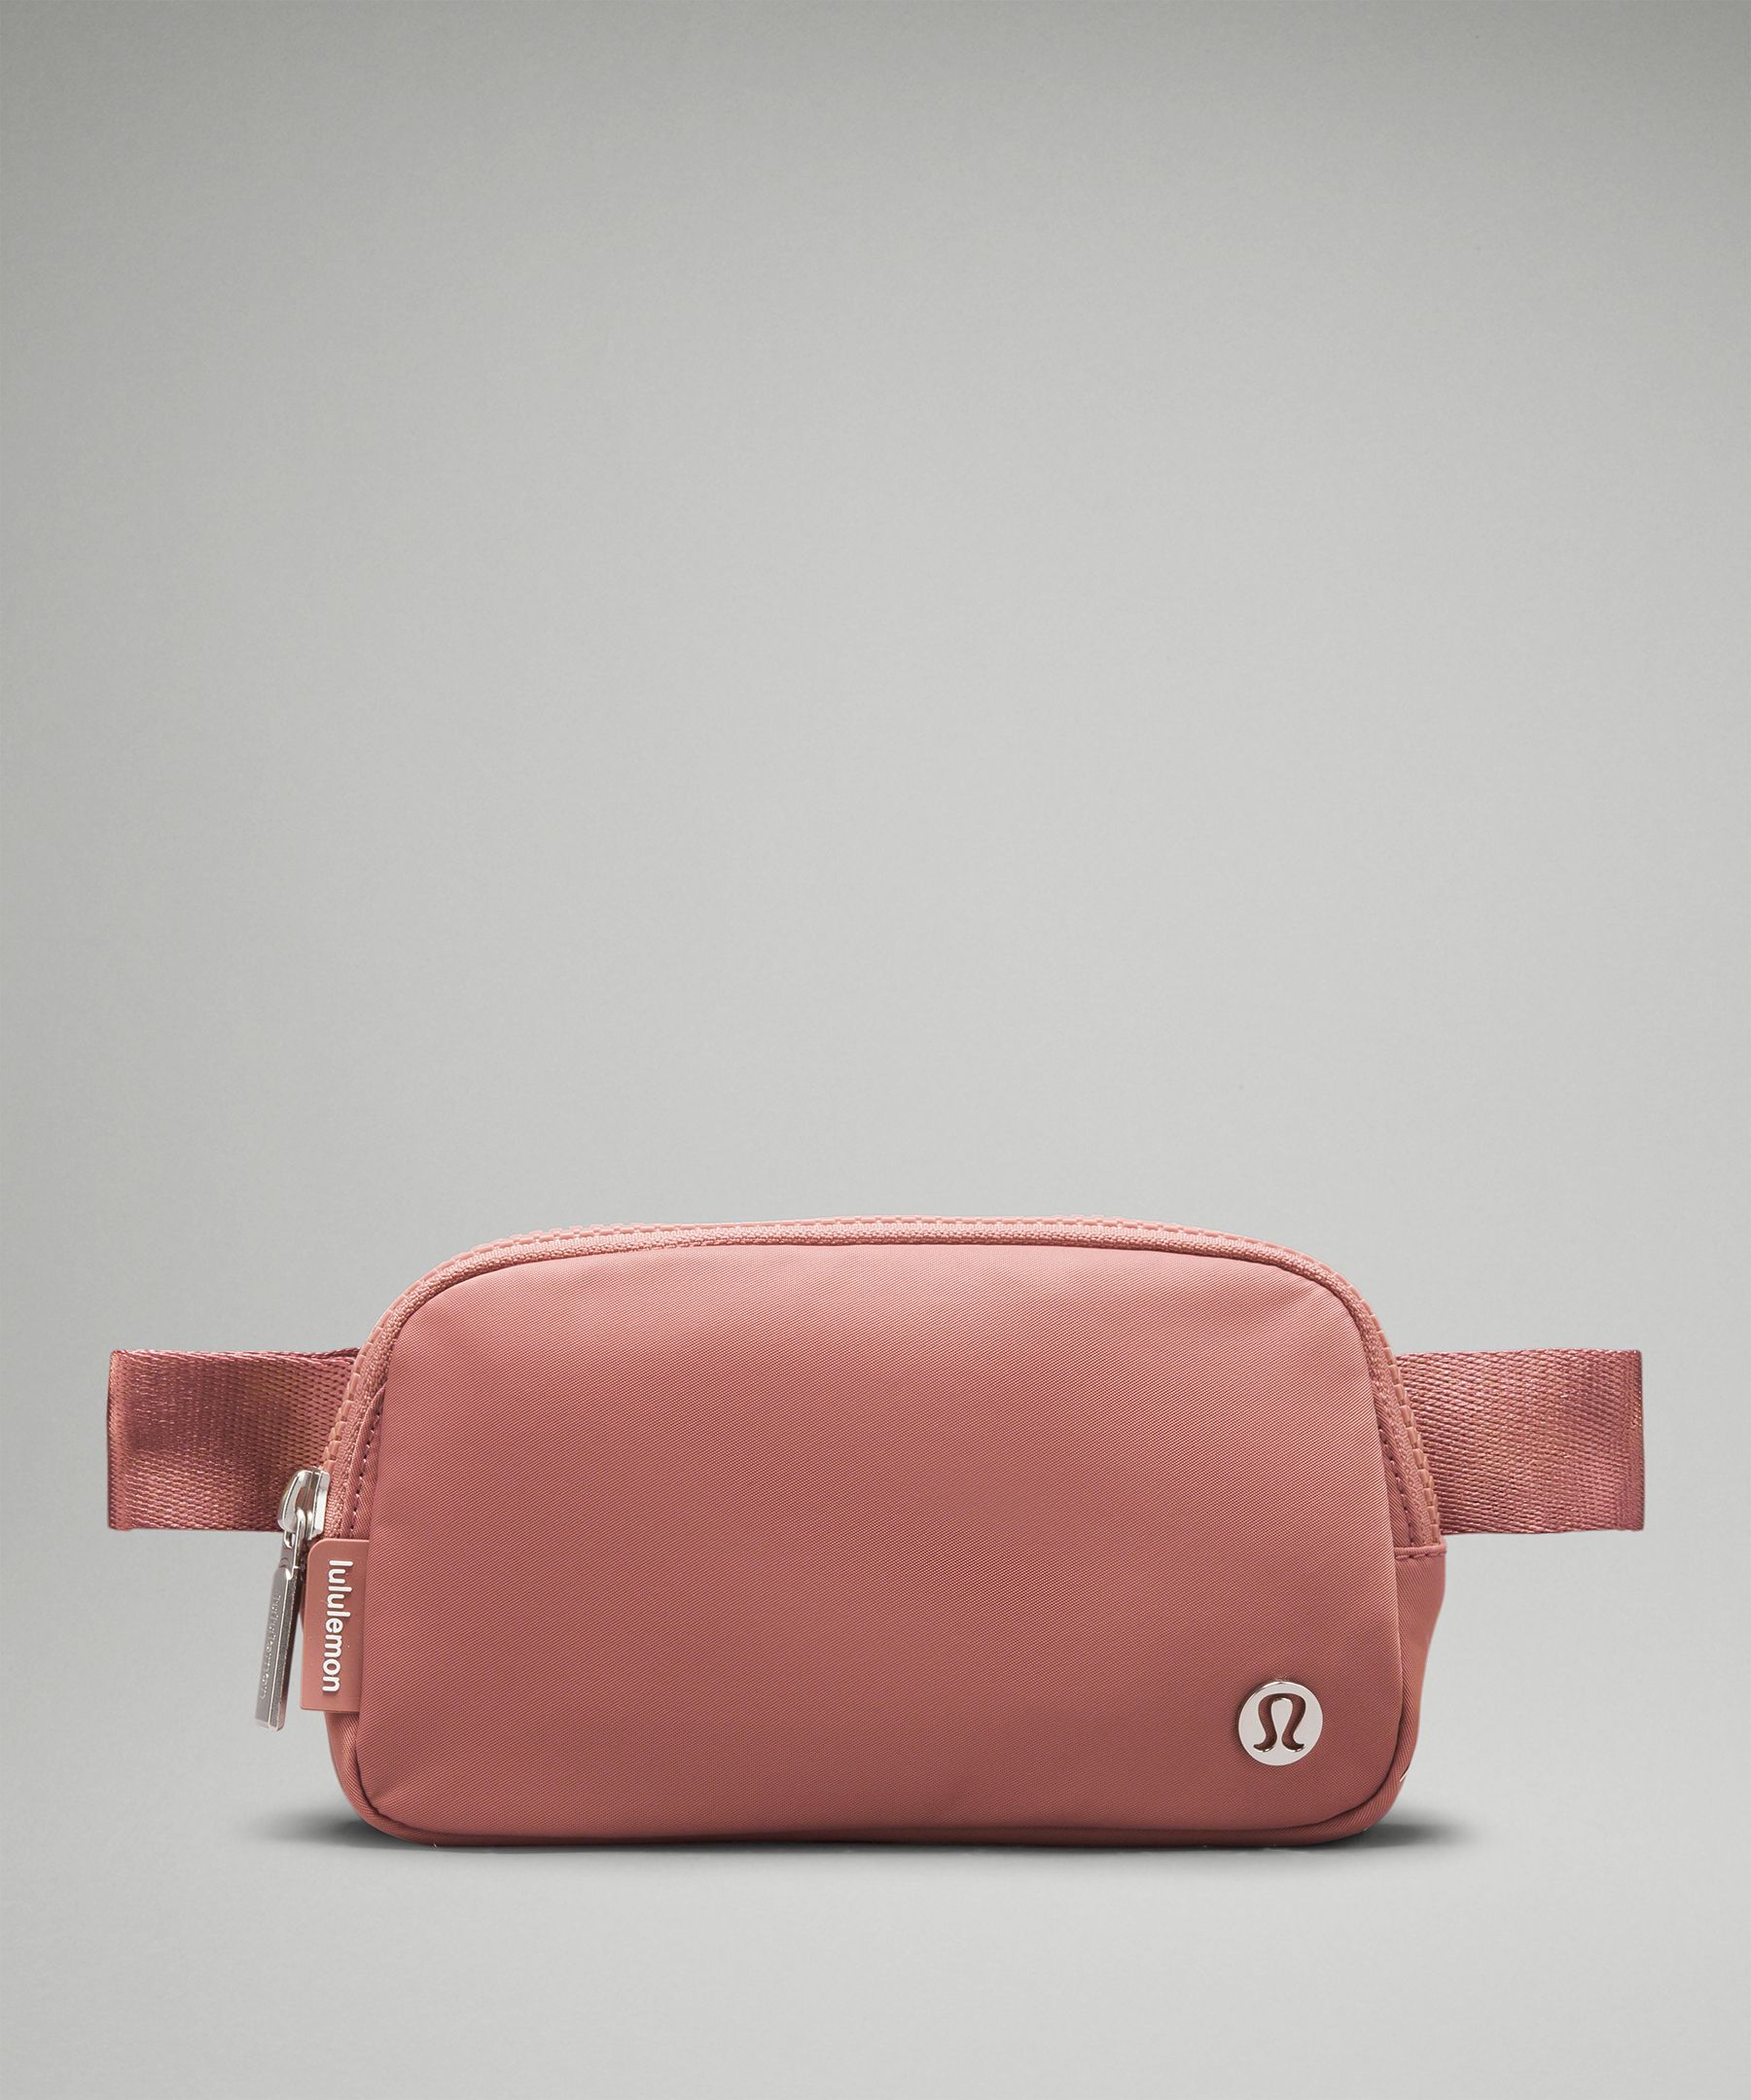 Accessories Lululemon Bags South Africa Outlet Store - Precocious Pink / Pink  Puff Now and Always Pouch